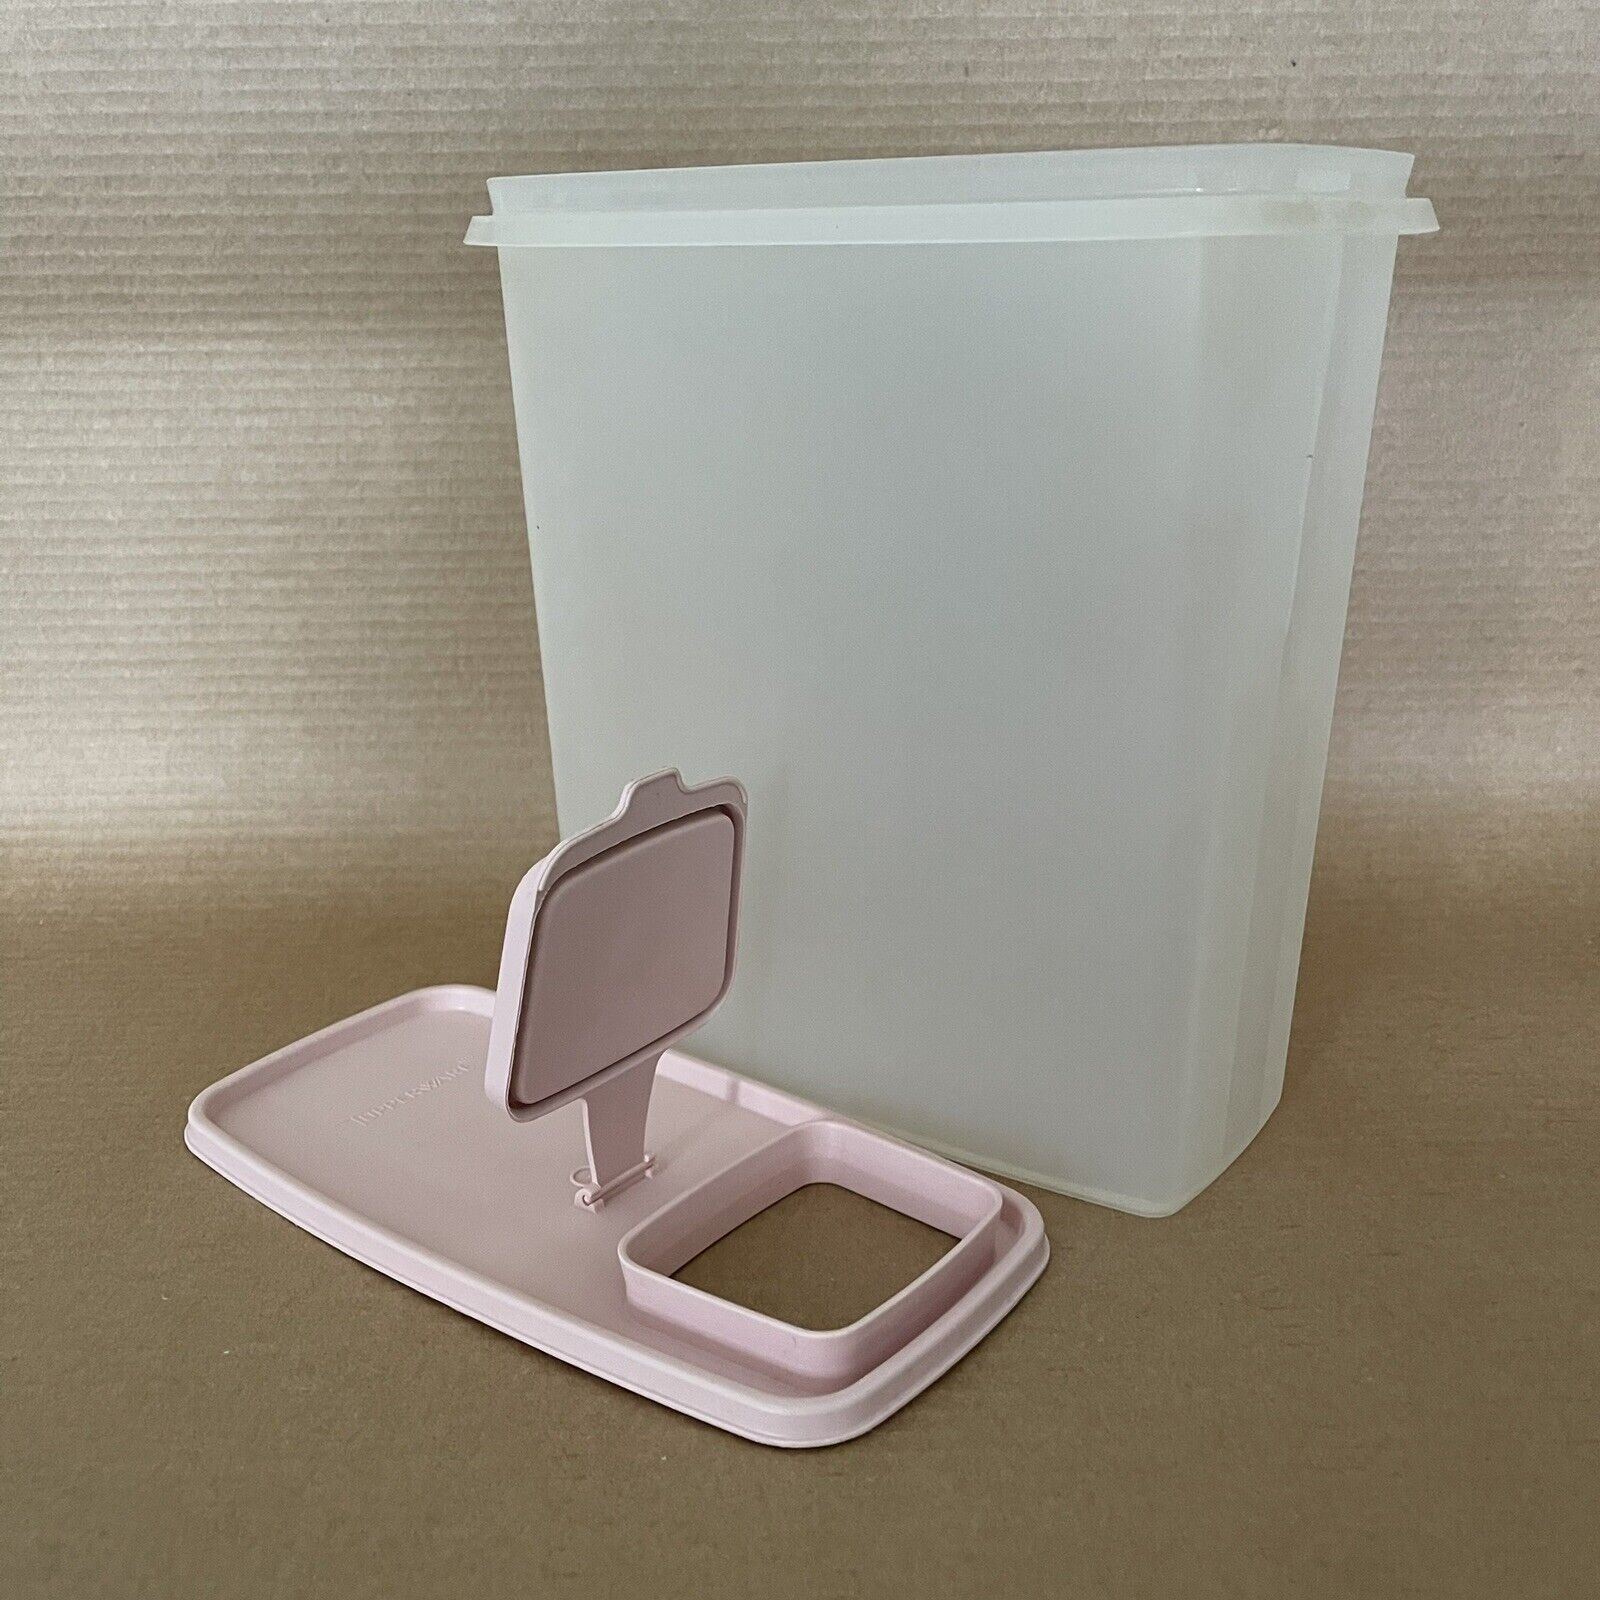 Tupperware Super Cereal Keeper Large 20 Cup Container 1588 Strawberry Cream Pink